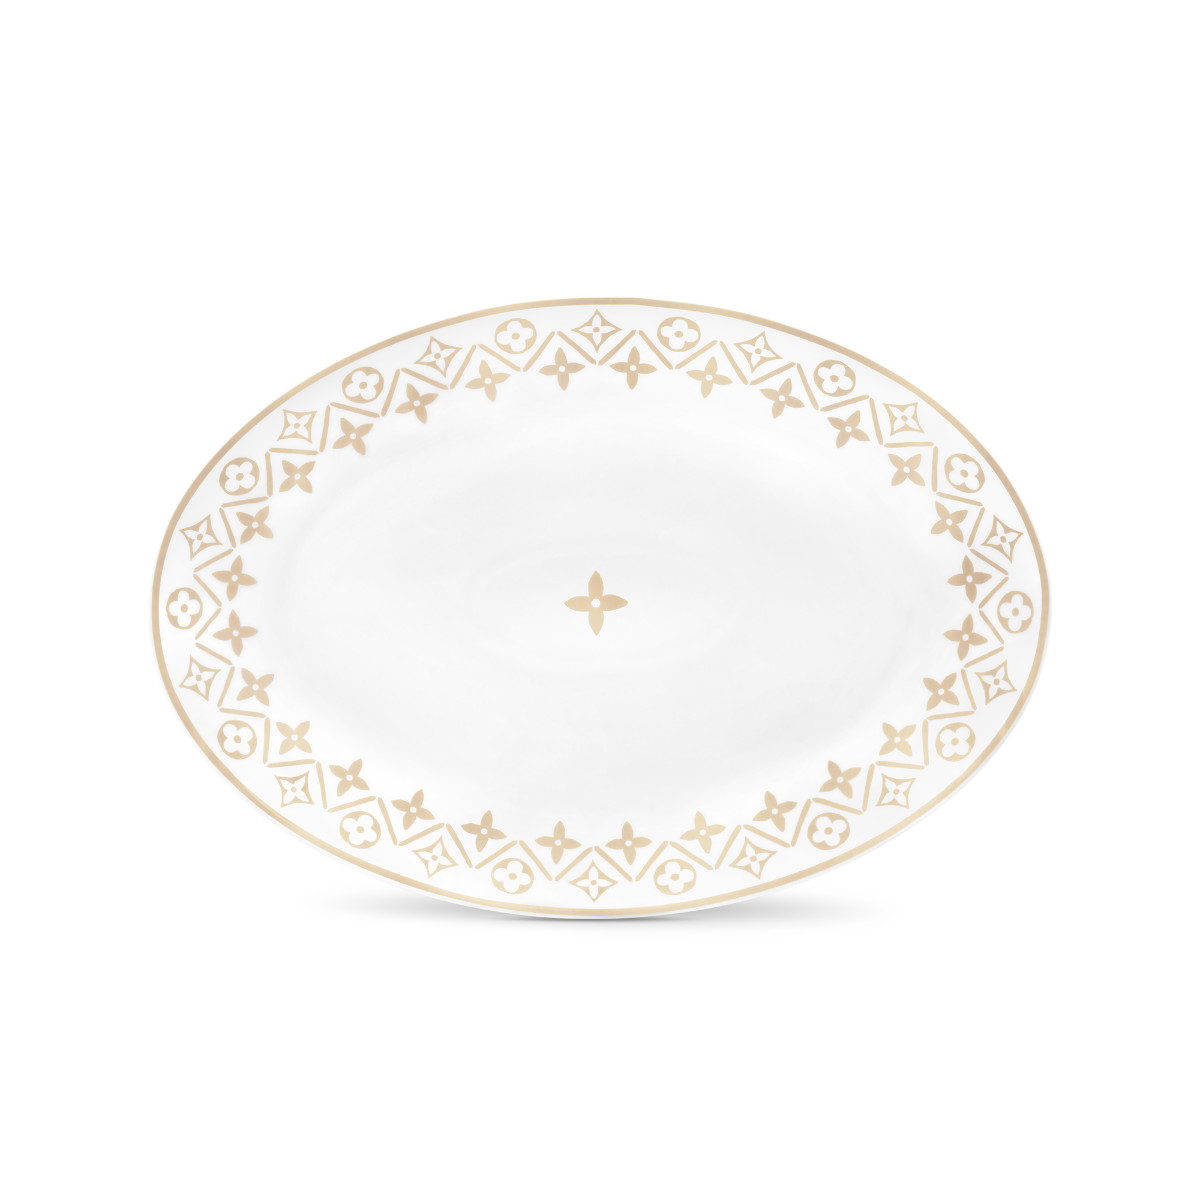 Louis Vuitton Reveals Its New Tableware Collection